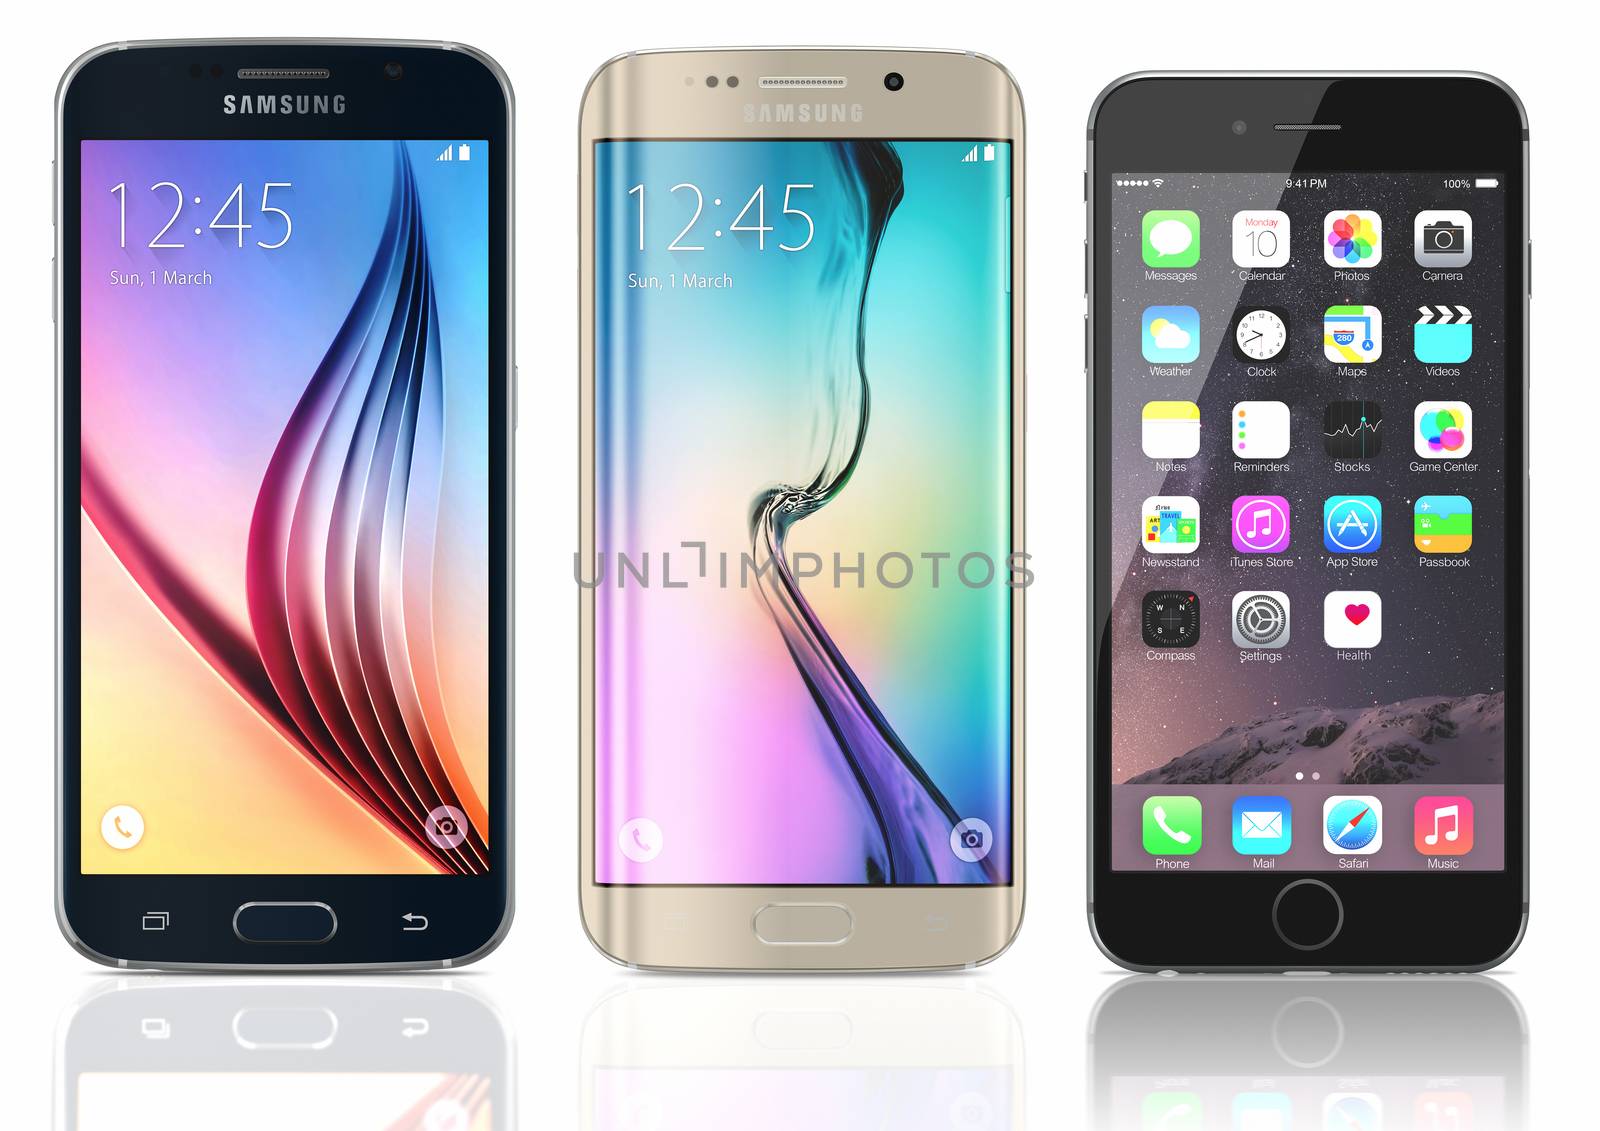 Samsung Galaxy S6 and Edge and iPhone 6 by manaemedia